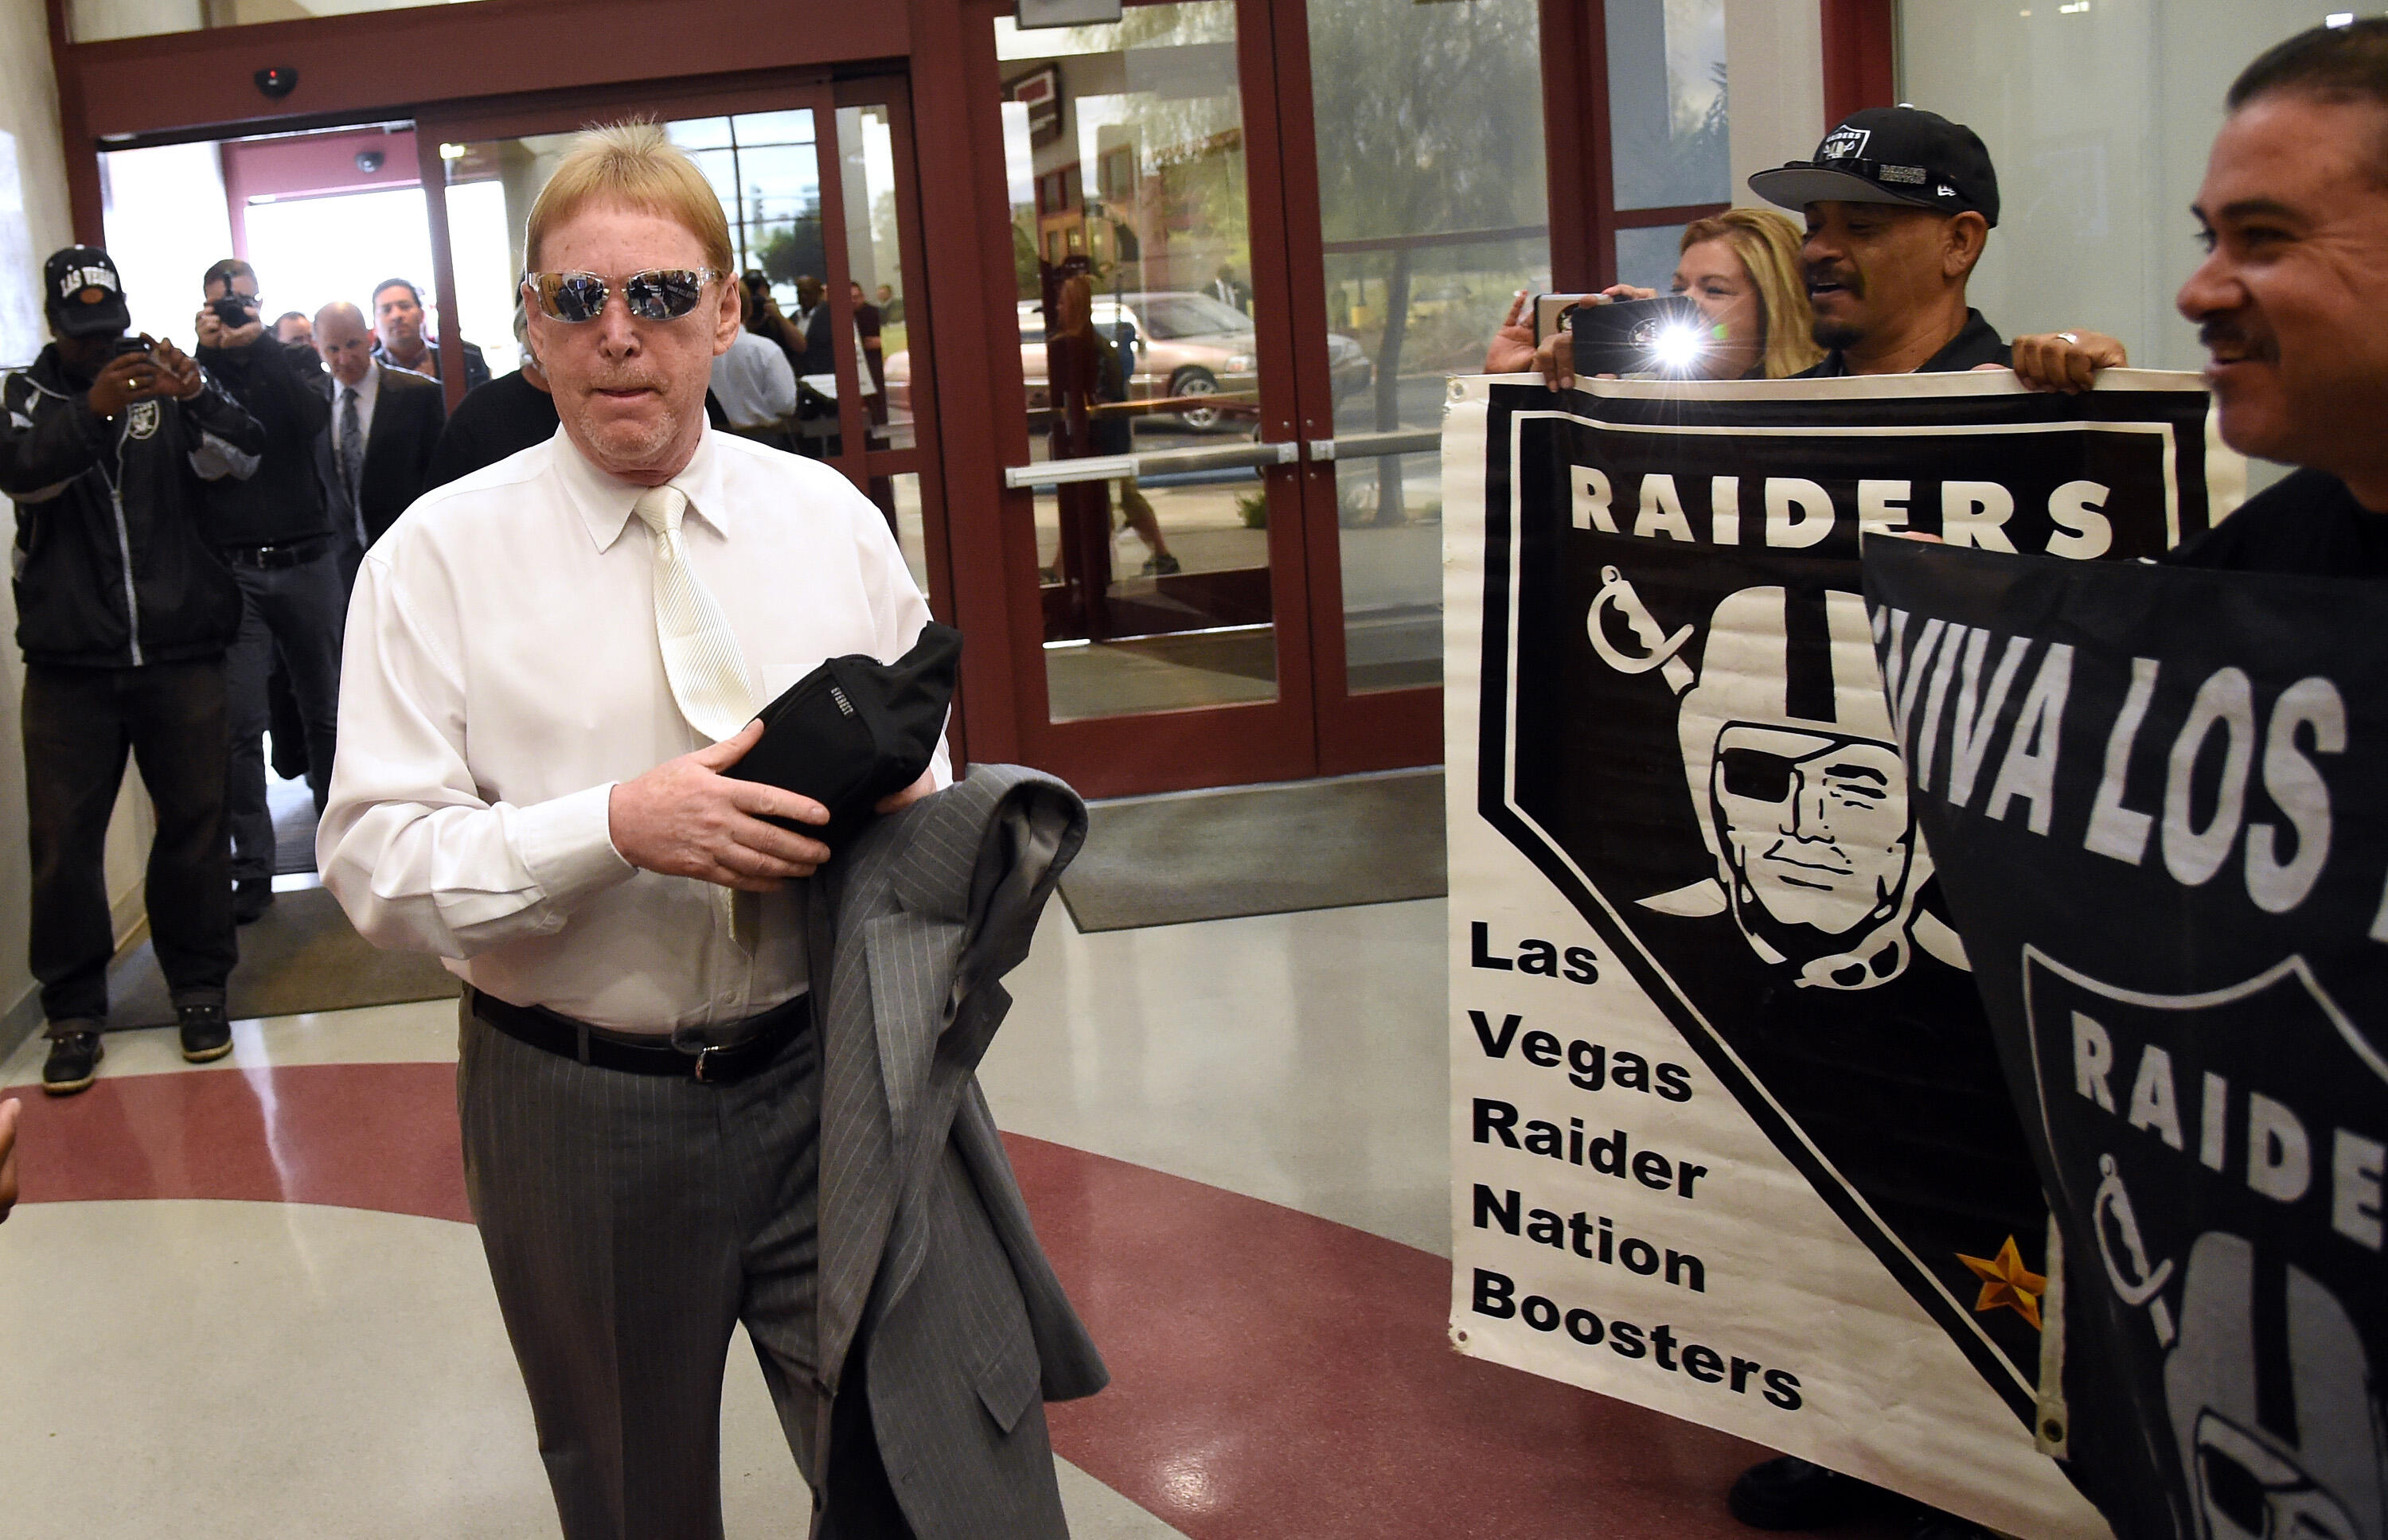 LAS VEGAS, NV - APRIL 28:  Oakland Raiders owner Mark Davis walks past fans holding Raiders signs as he arrives at a Southern Nevada Tourism Infrastructure Committee meeting at UNLV on April 28, 2016 in Las Vegas, Nevada. Davis told the committee he is wi